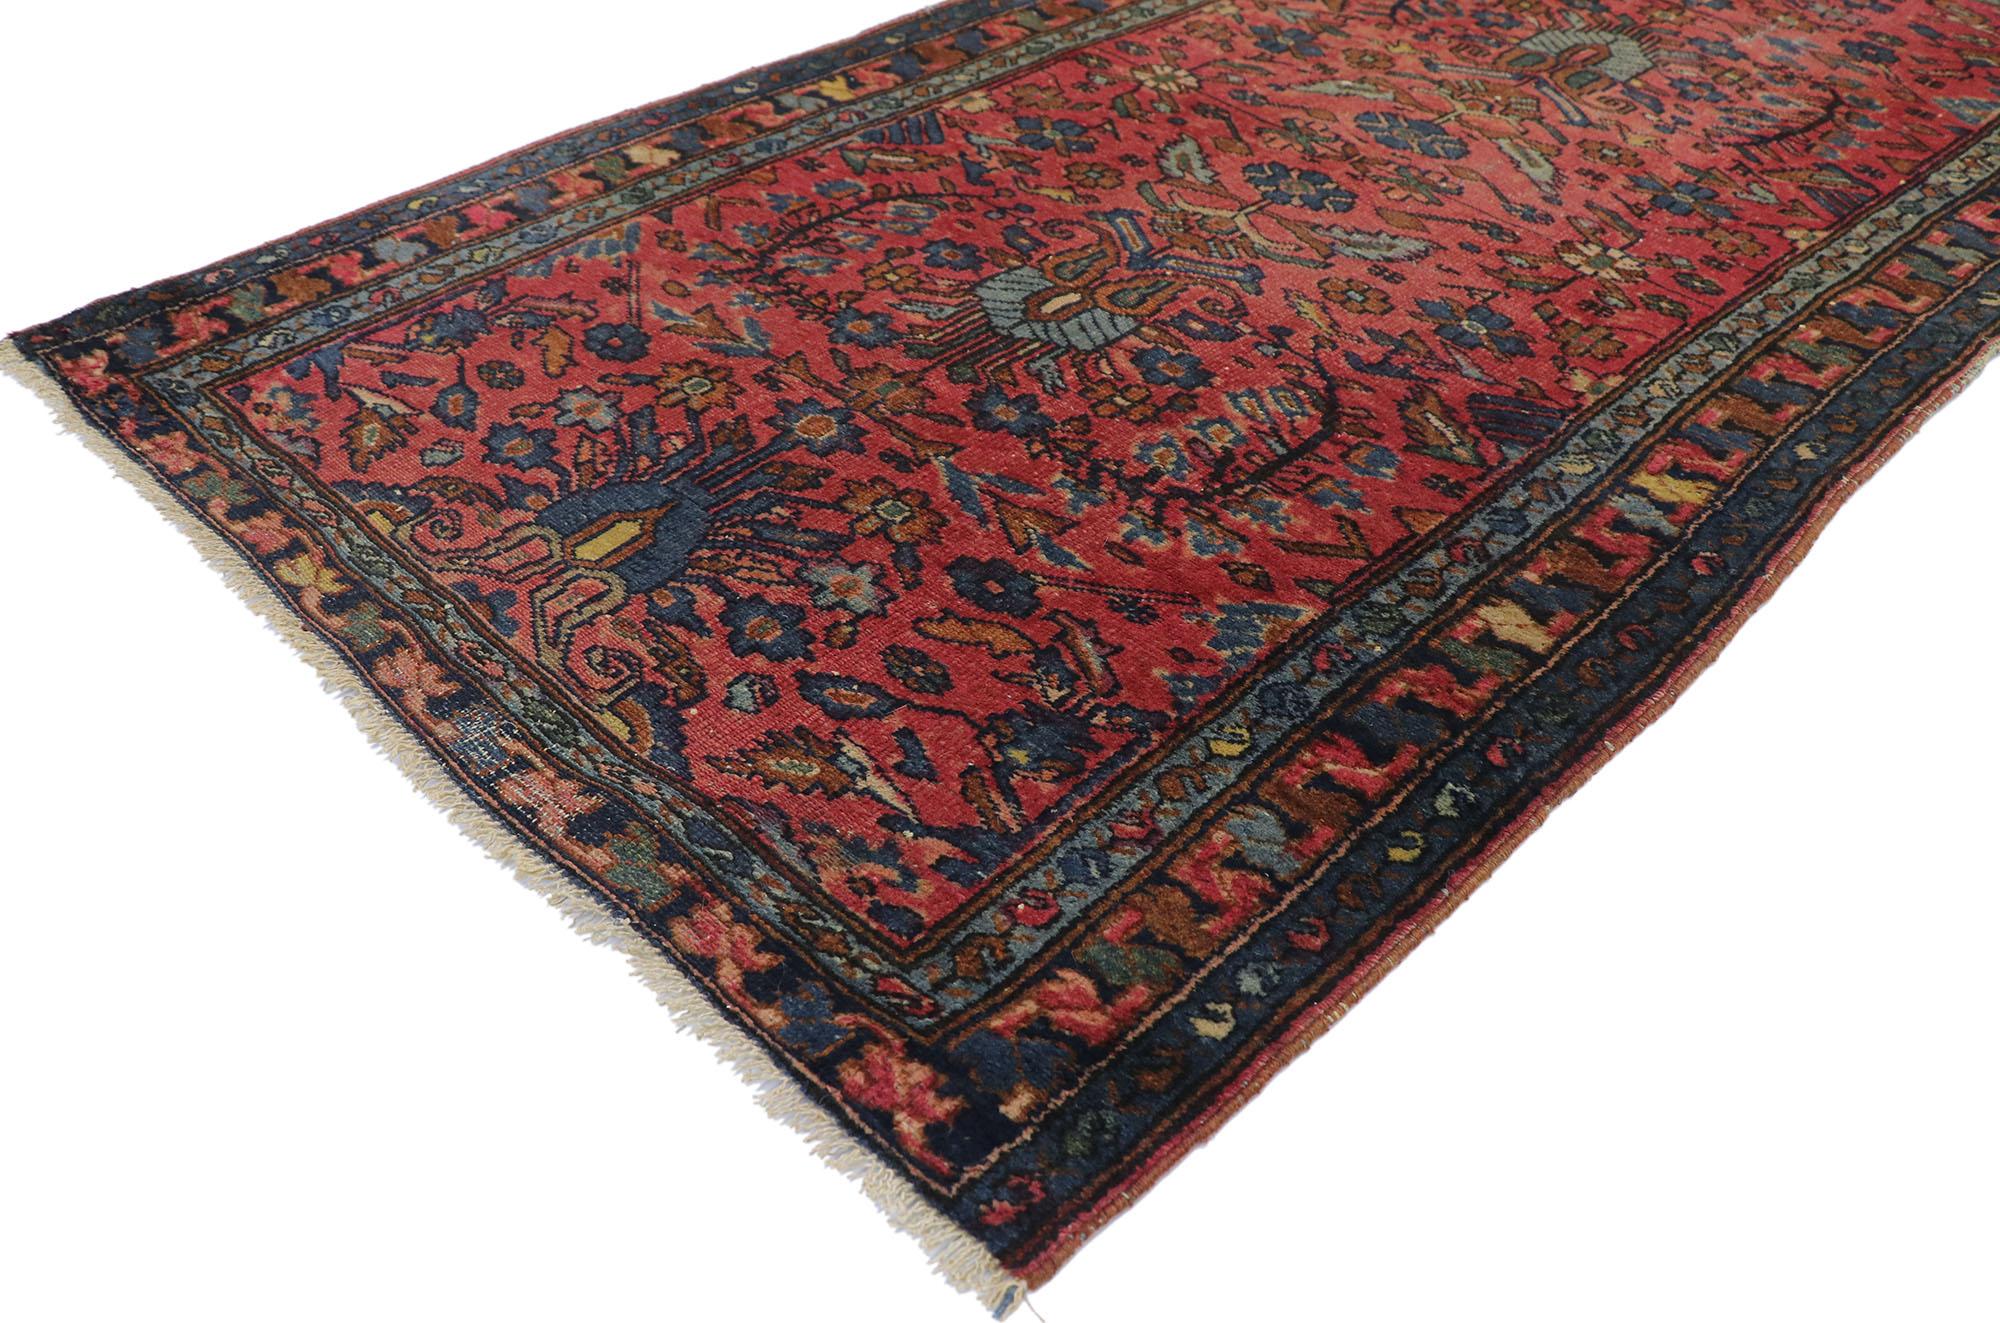 77596, distressed antique Persian Hamadan rug with Rustic English Manor Tudor style 03'05 x 06'02. With its dark, rich colors and ornate detailing, this hand knotted wool distressed antique Persian Hamadan rug is poised to impress. The abrashed